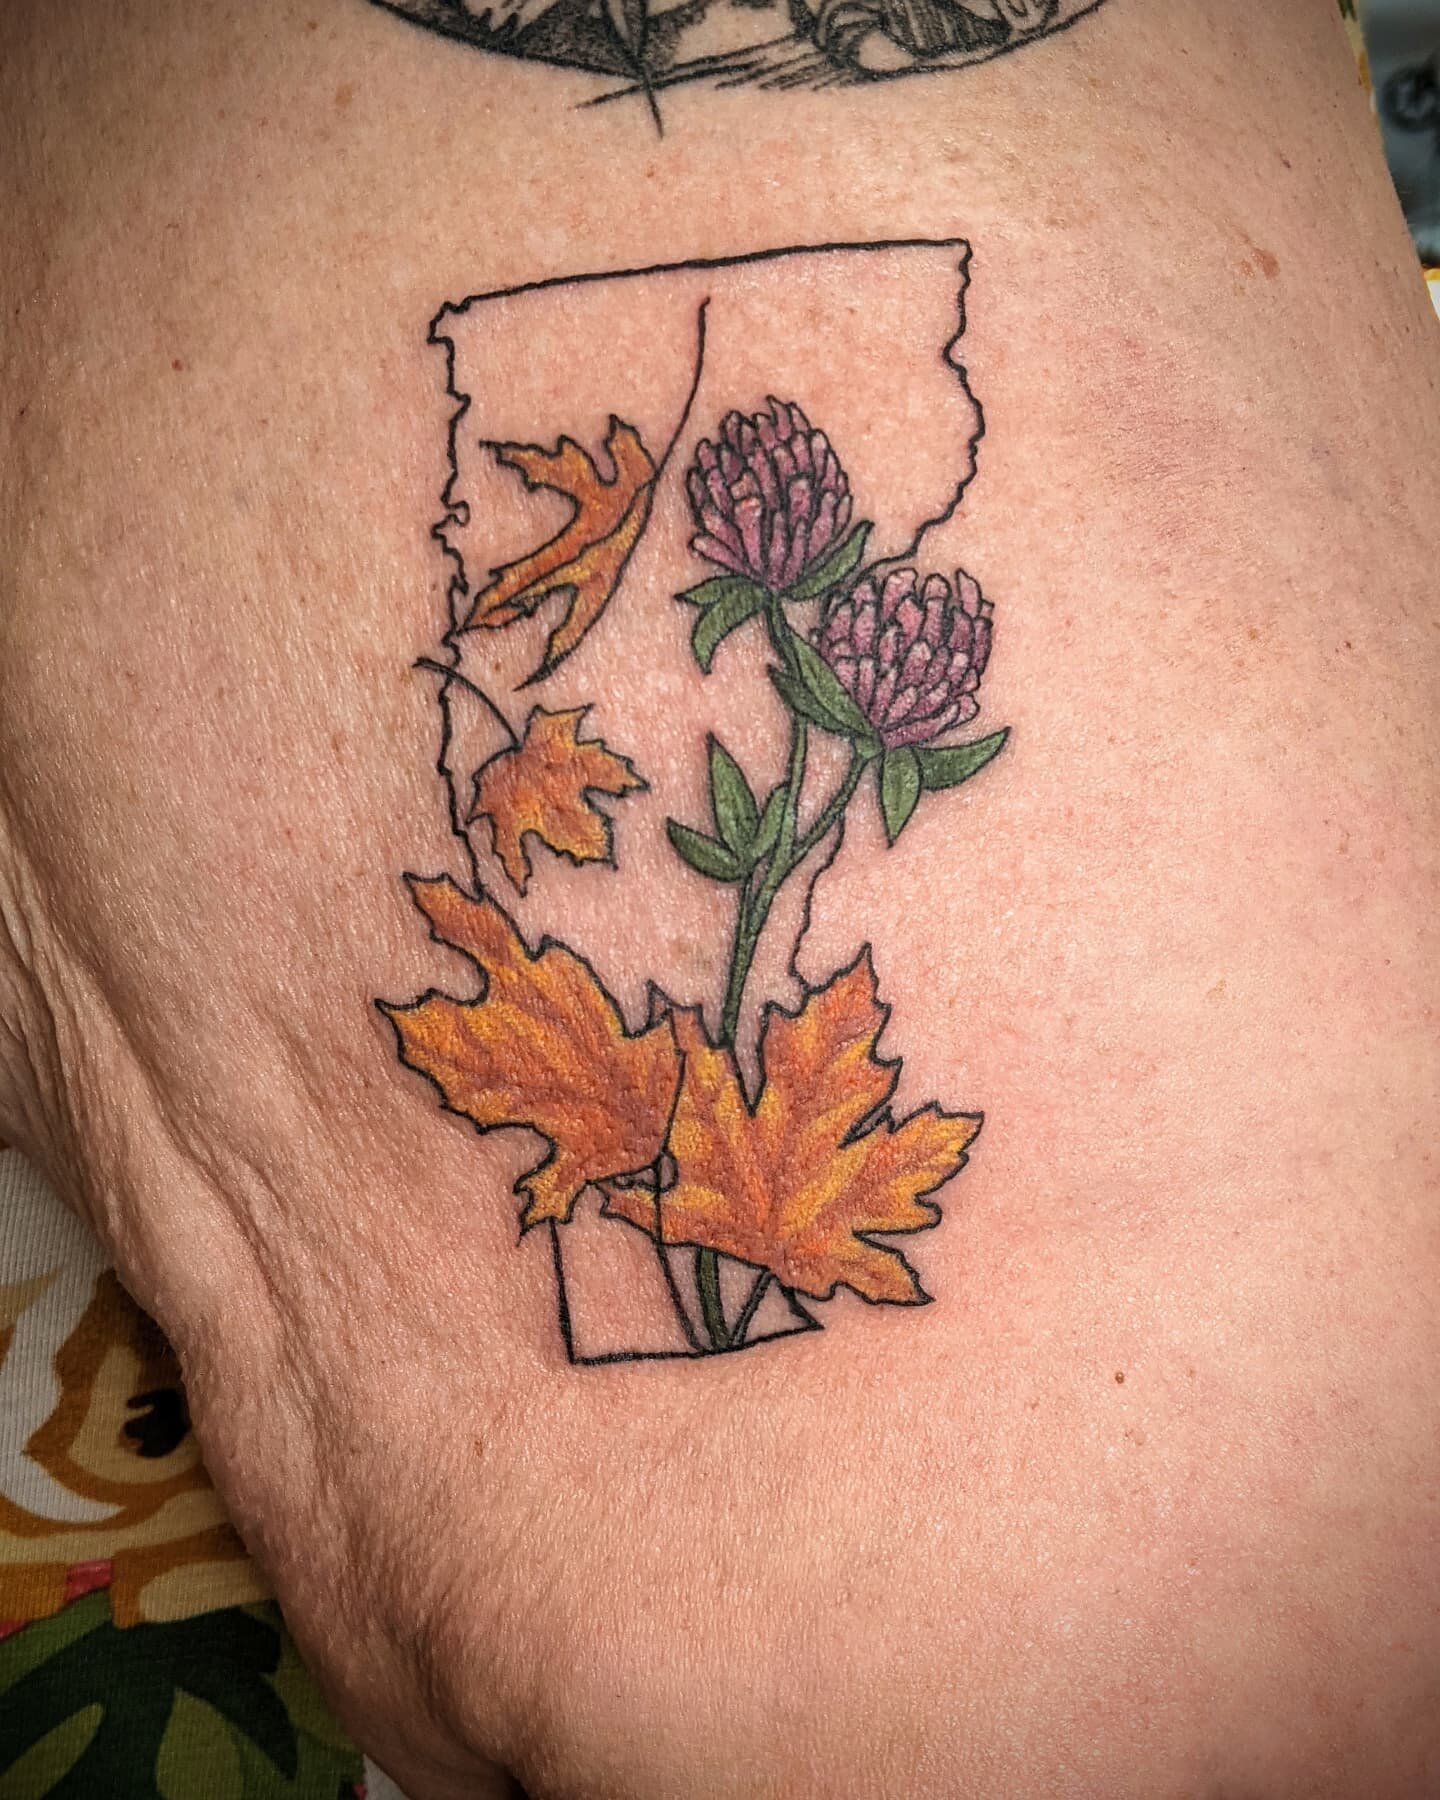 Tribute to VT before moving away💕

#colortattoo #naturetattoo #tattooinspiration #vermonttattooartist #vttattoo #vermontartist #vermonttattooers #vermonttattoo #stowevt